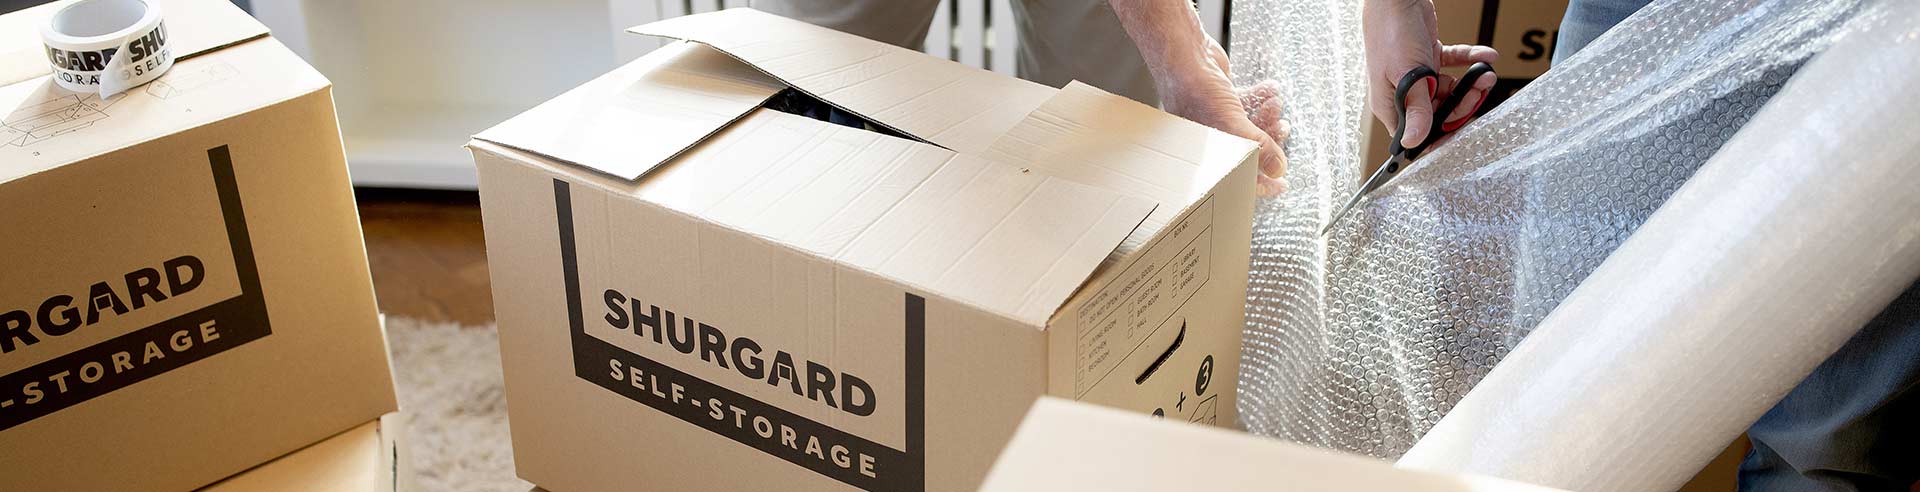 Health and safety tips for Shurgard Self Storage customers